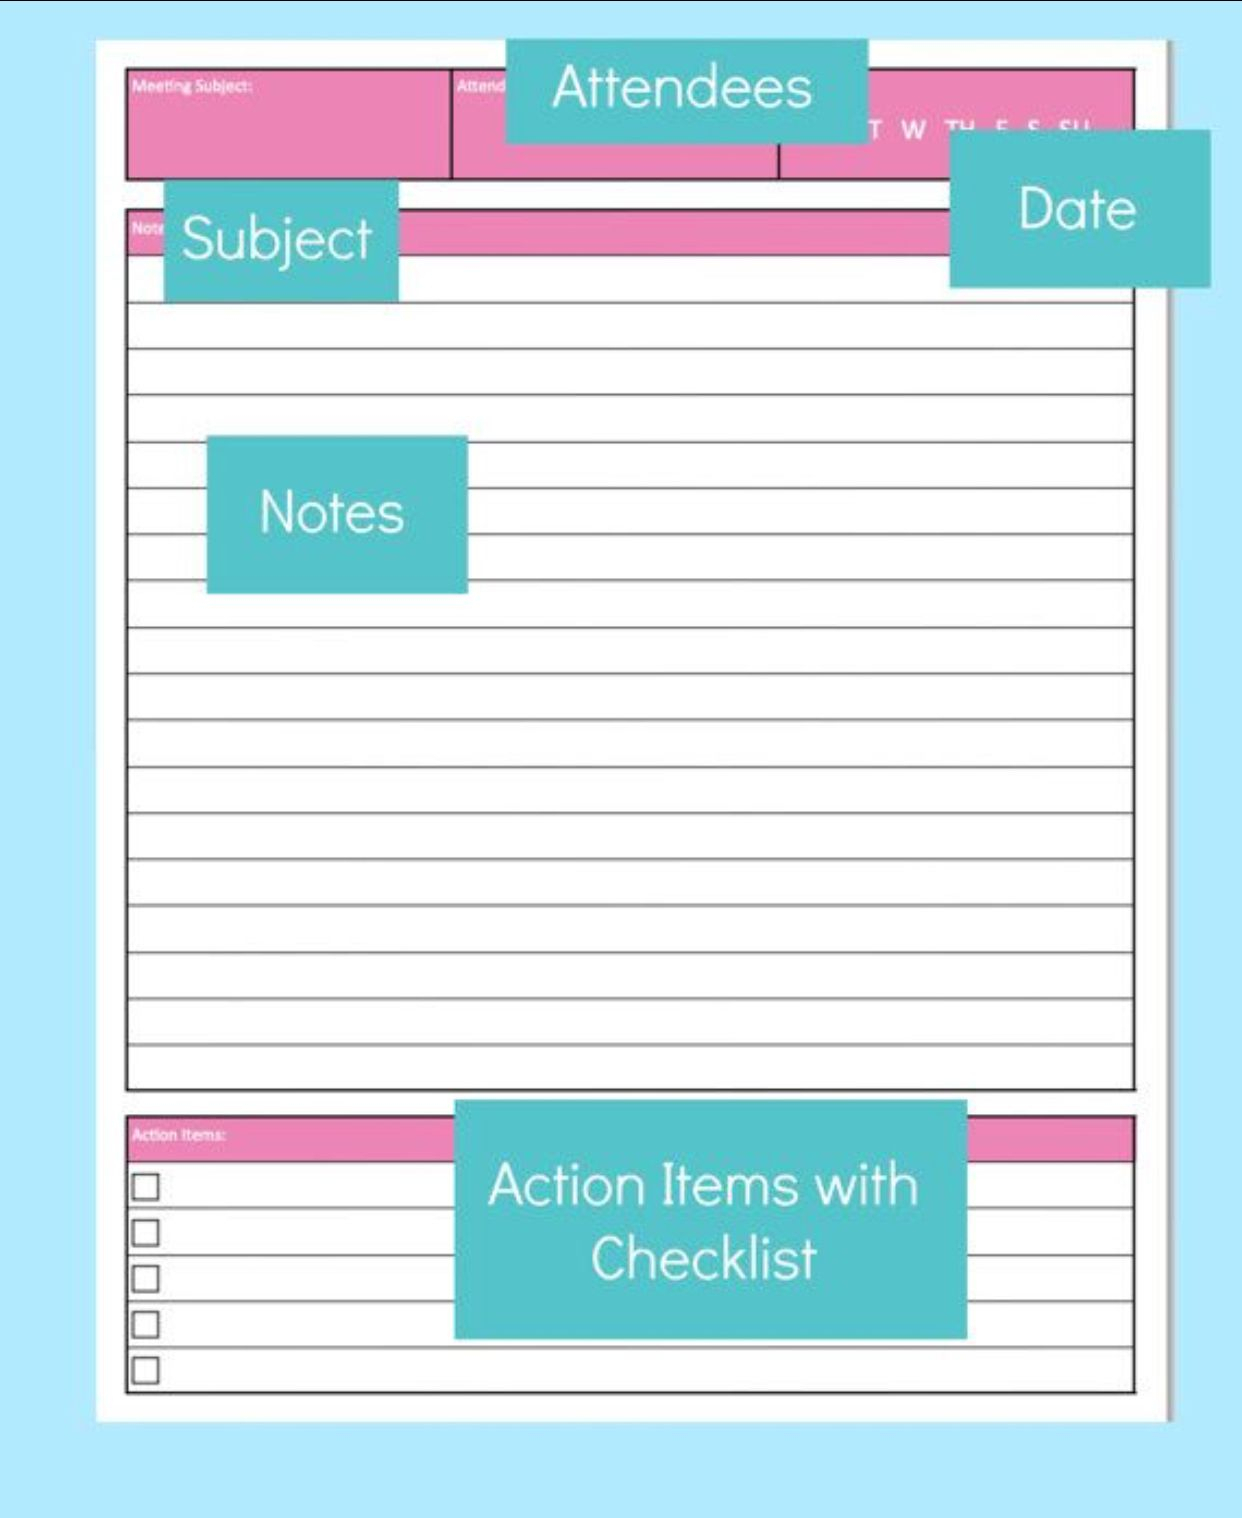 Note Taking Templates For Meetings I Would - Rocketbook For Meeting Note Taking Template